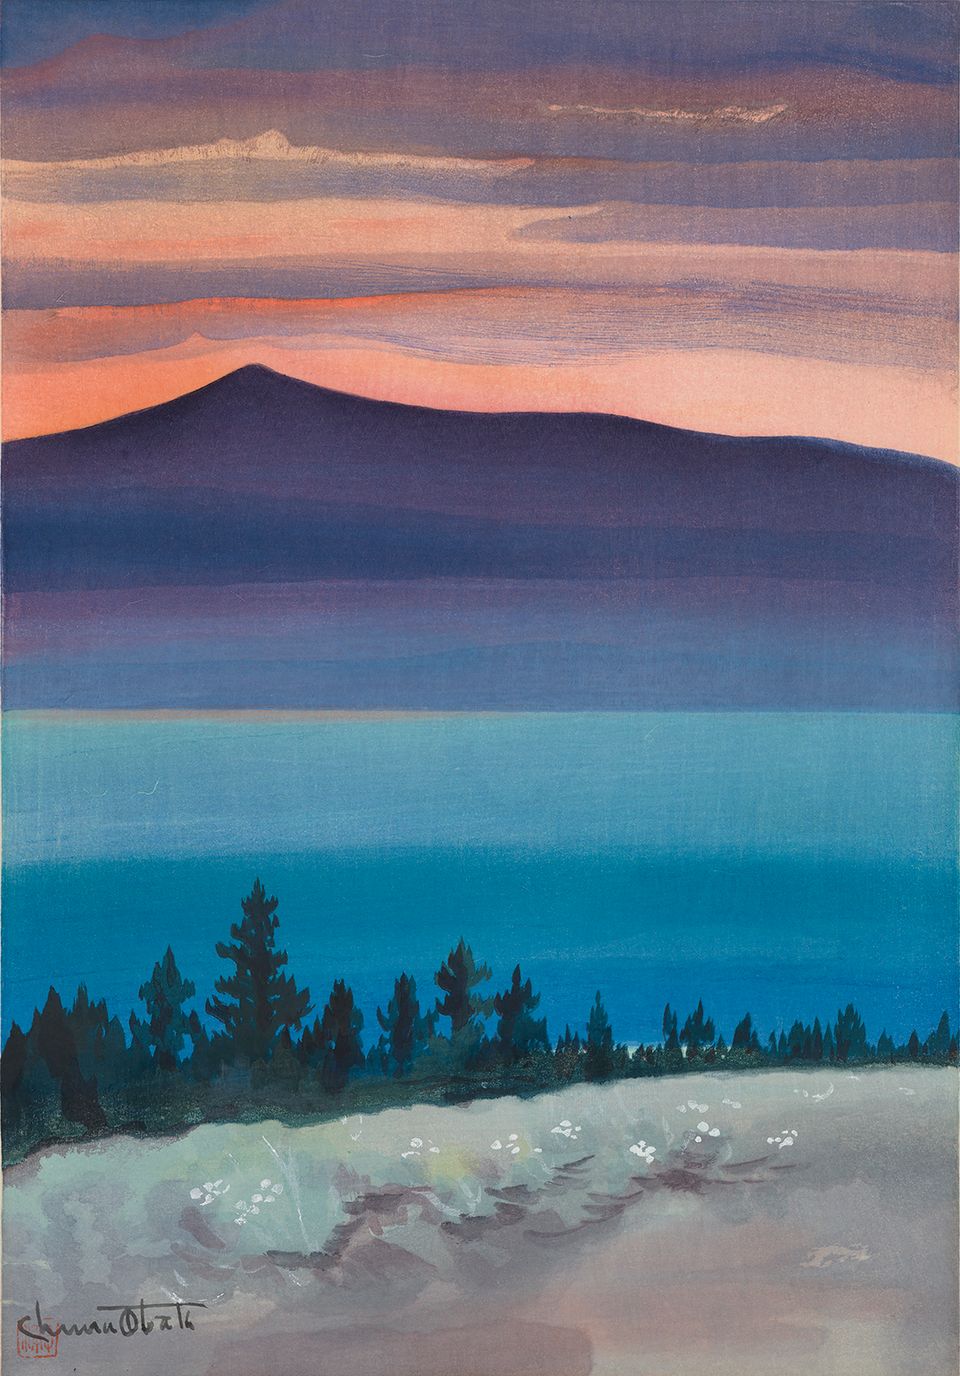 A watercolor image with trees in the foreground, mountains in the middle ground, and the sunset in the background.